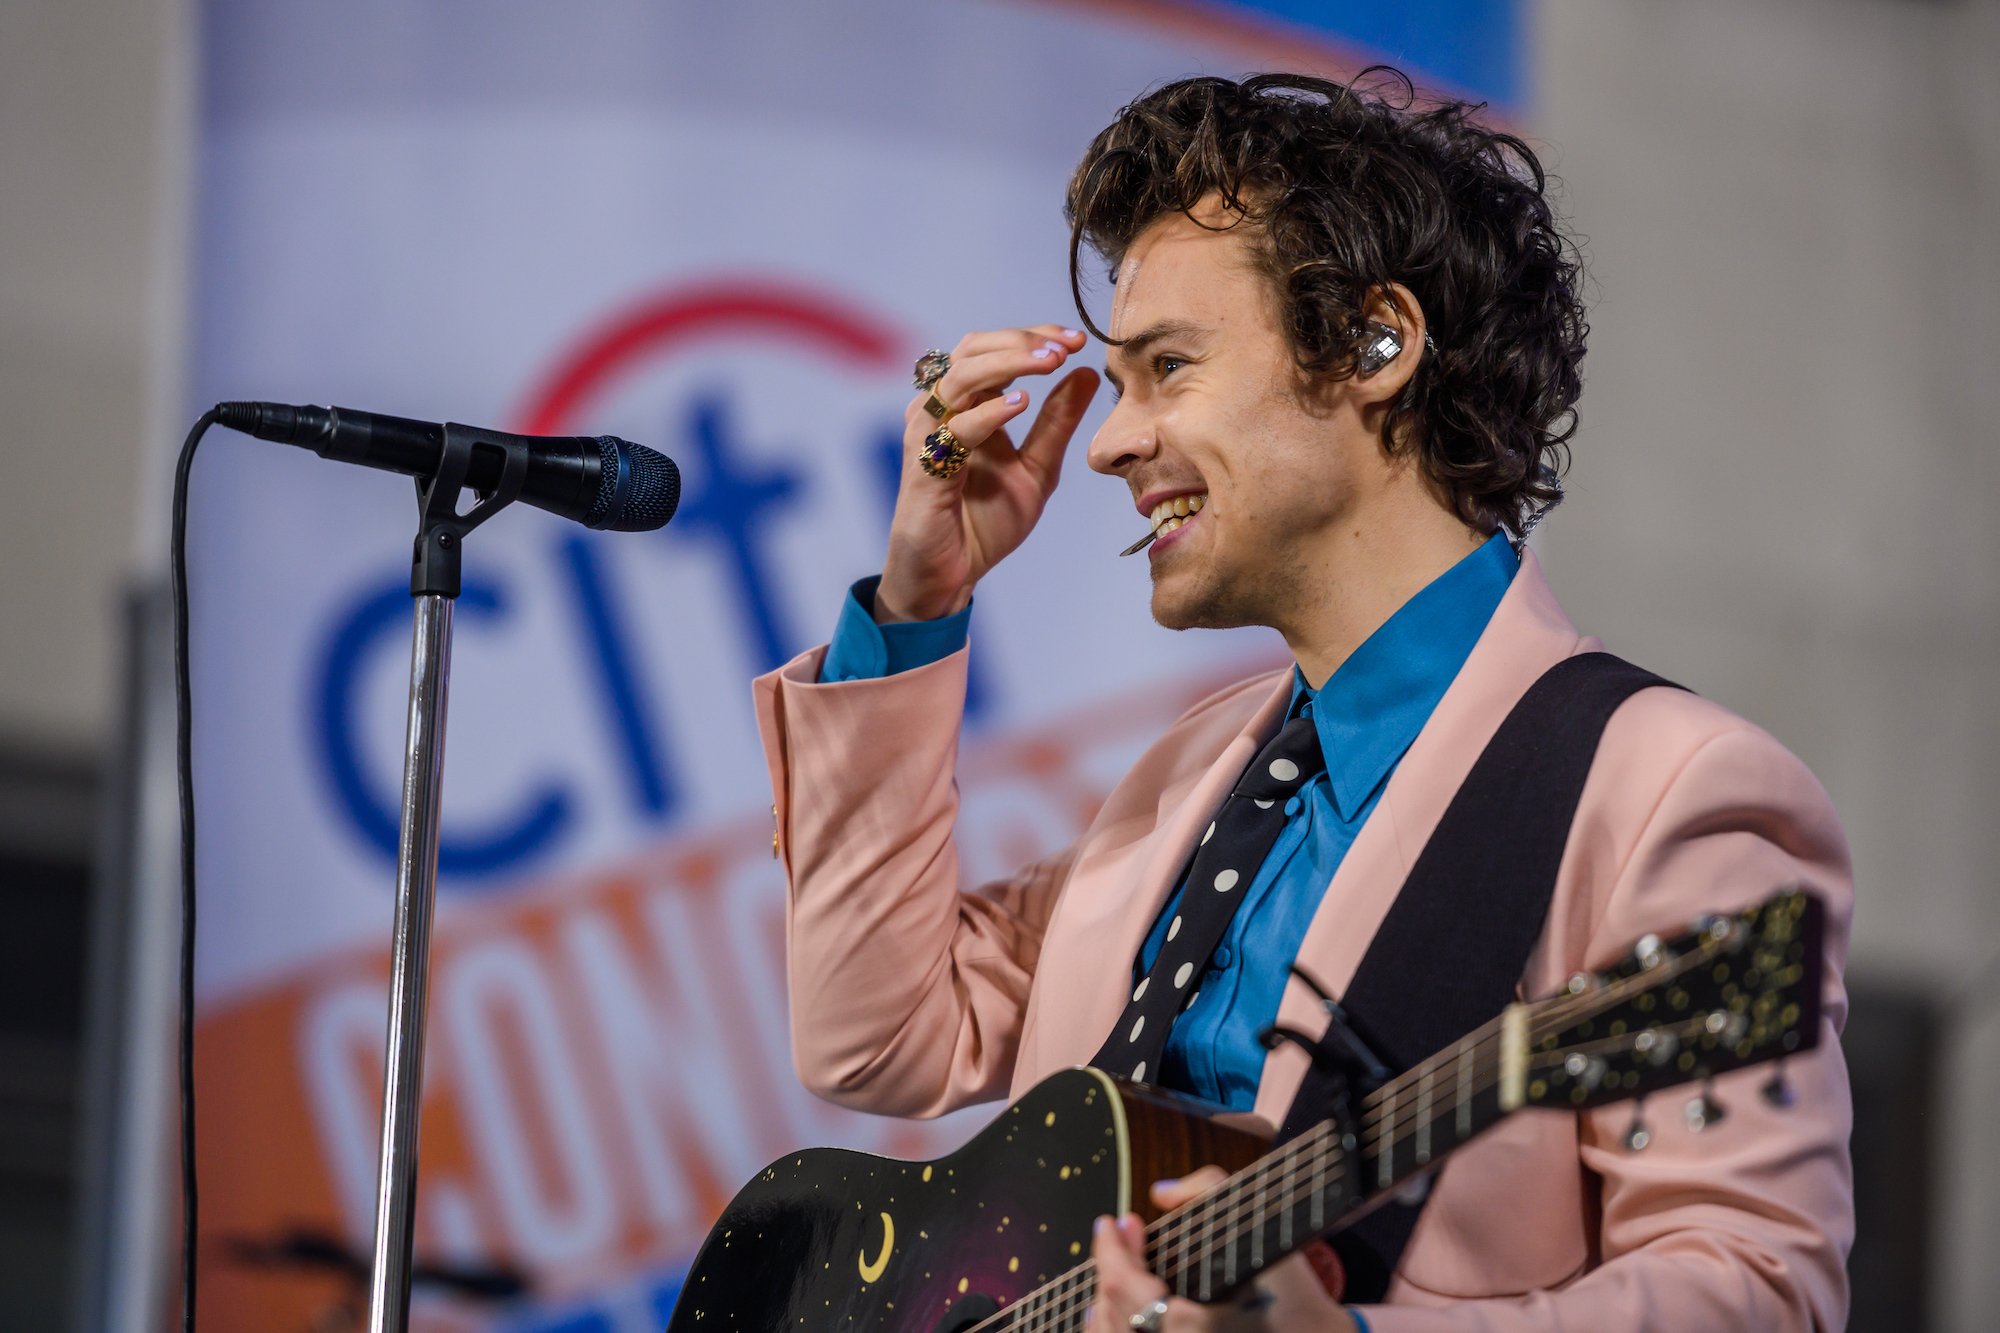 Harry Styles on The TODAY Show, Wednesday, February 26, 2020.